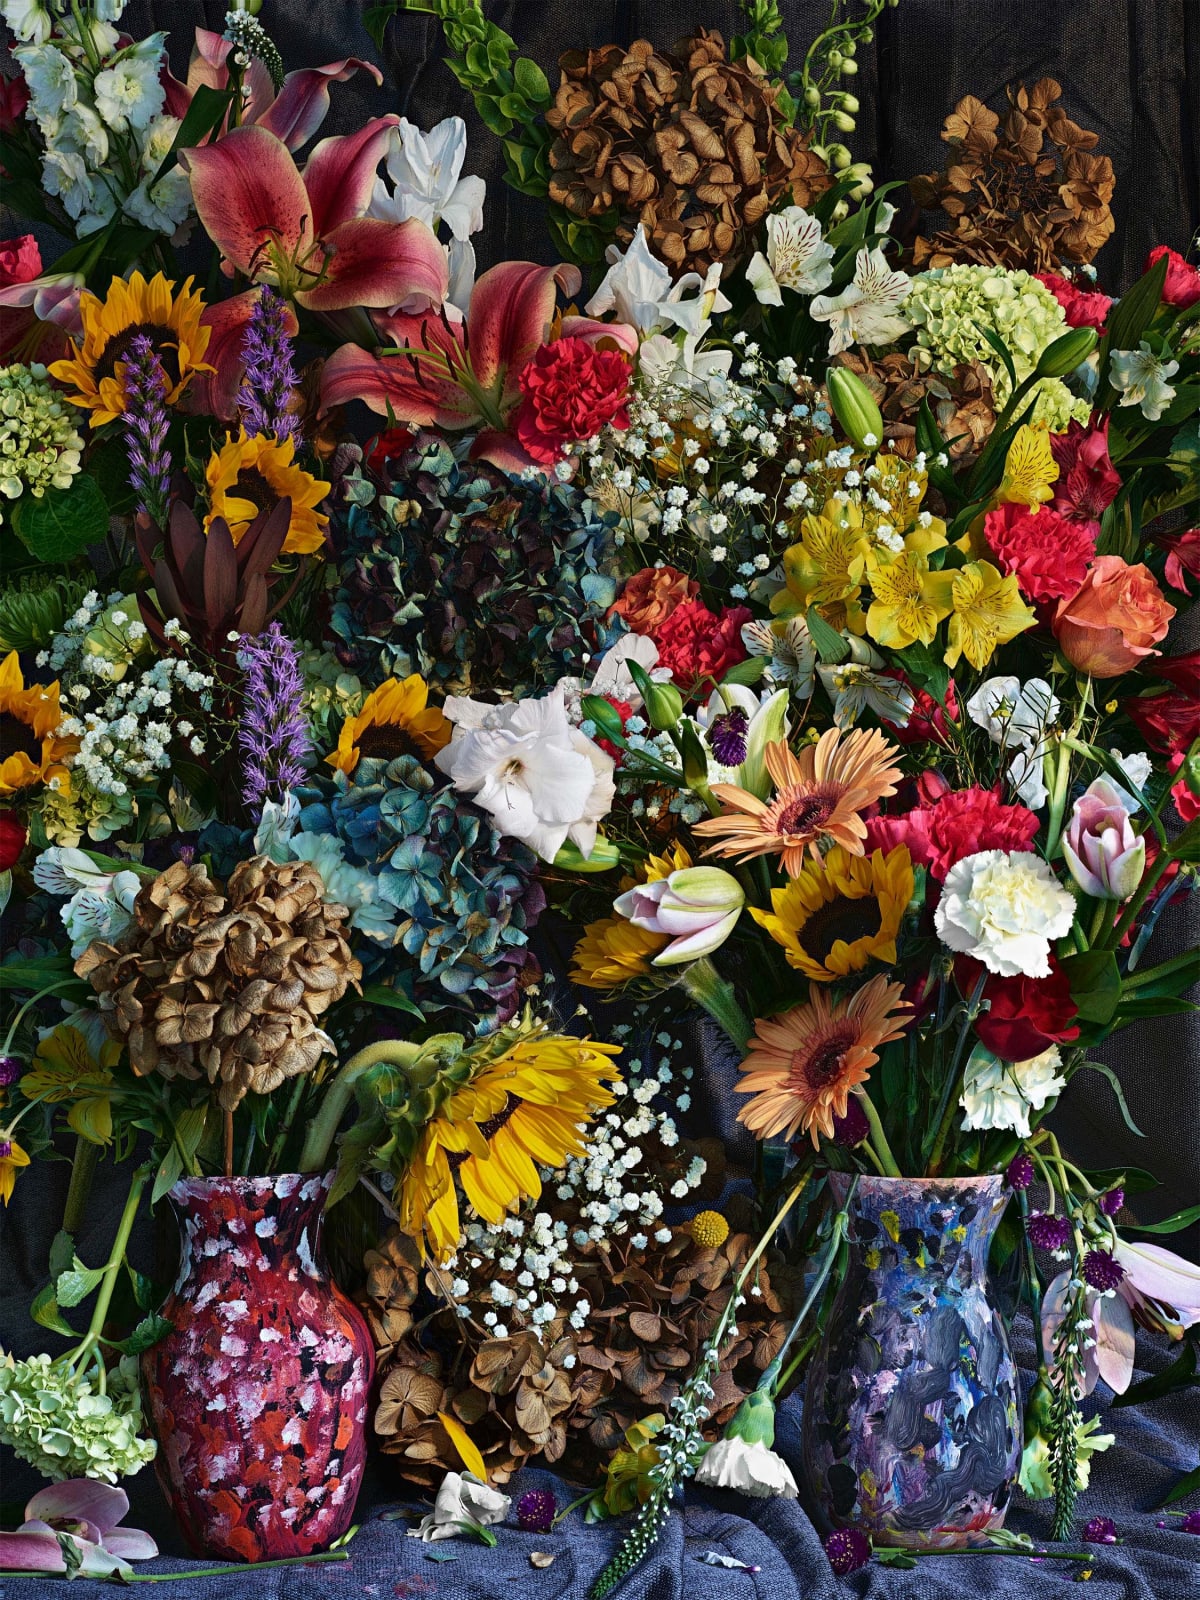 Abelardo Morell Flowers for Lisa #31 two huge bouquets of colorful vibrant flowers in style of Dutch floral still lifes